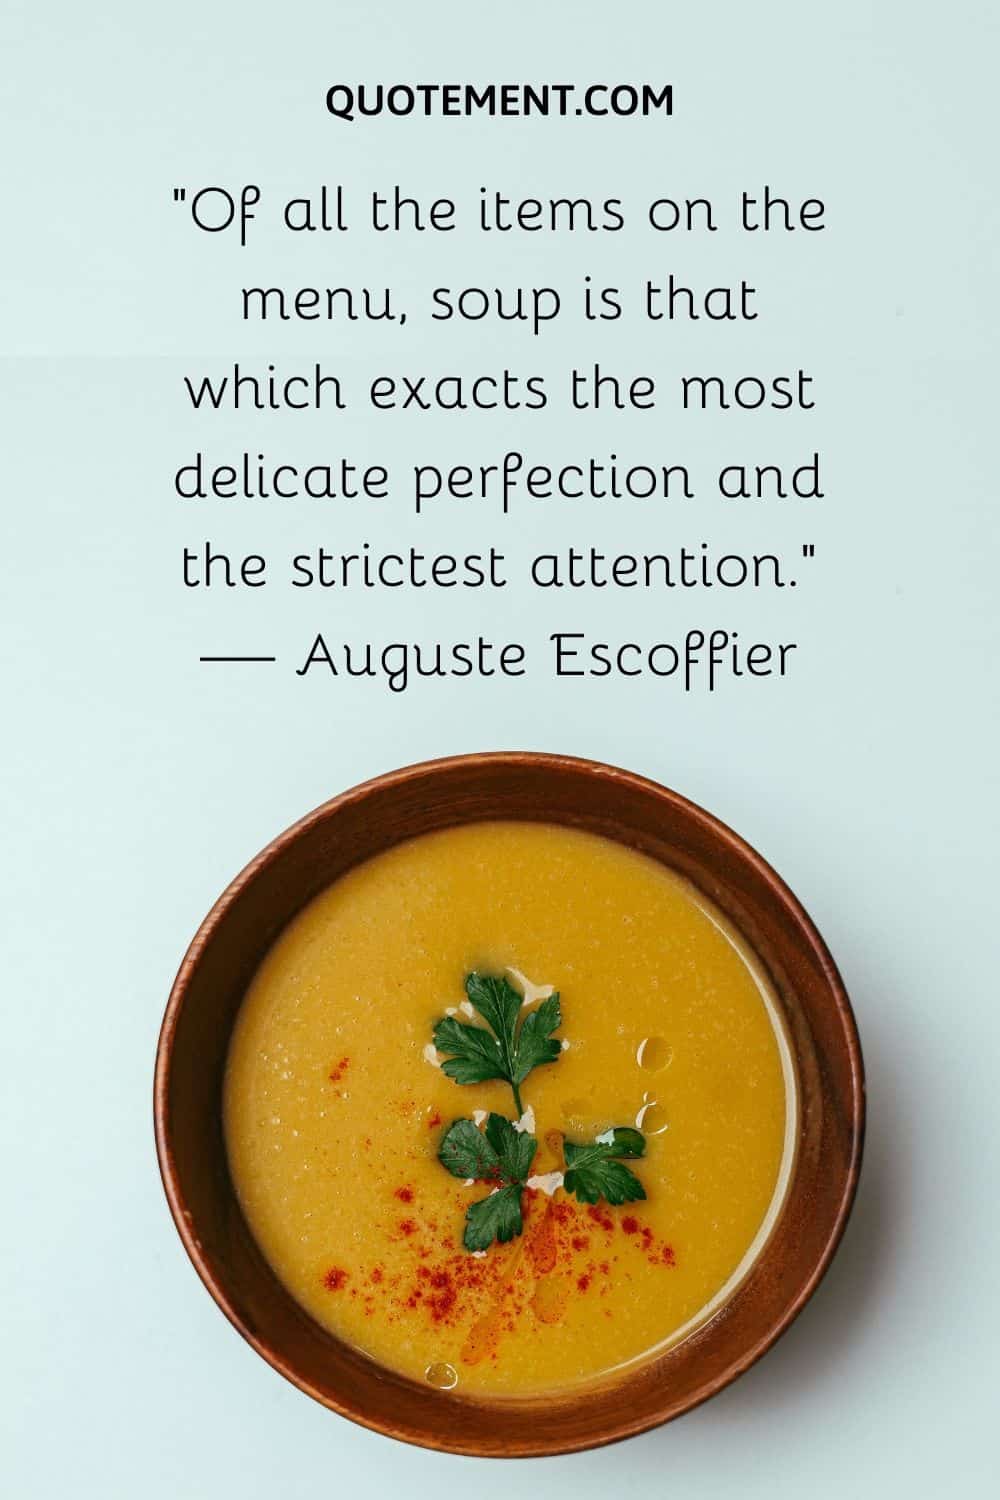 soup is that which exacts the most delicate perfection